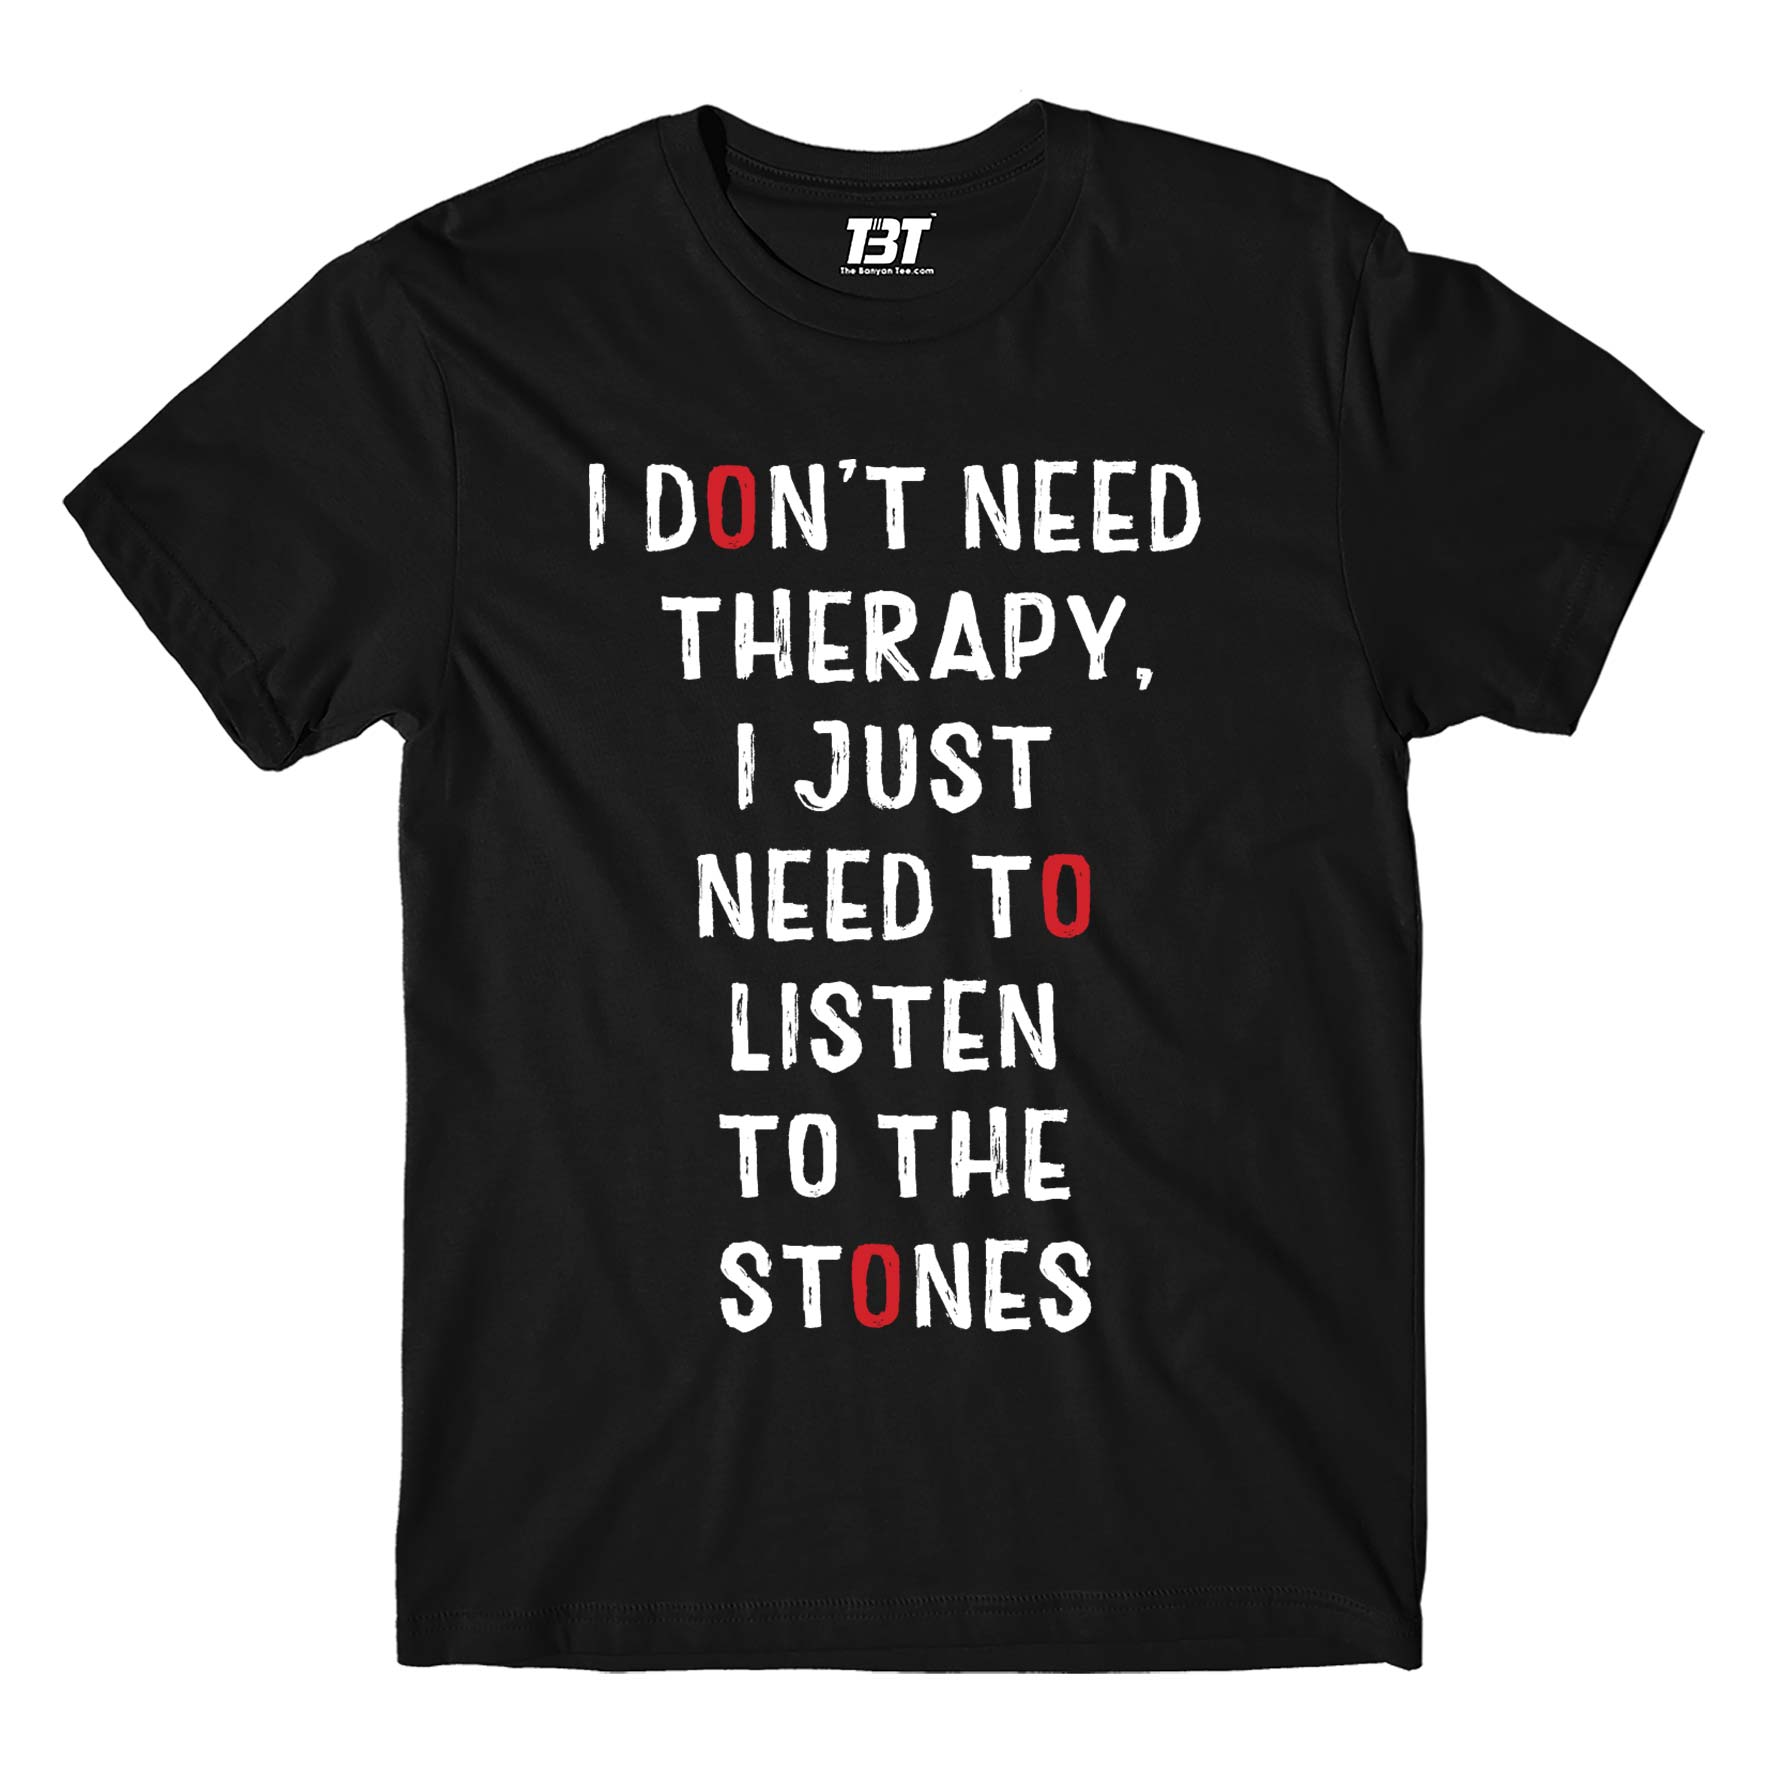 the rolling stones i don't need therapy t-shirt music band buy online india the banyan tee tbt men women girls boys unisex Sky Blue